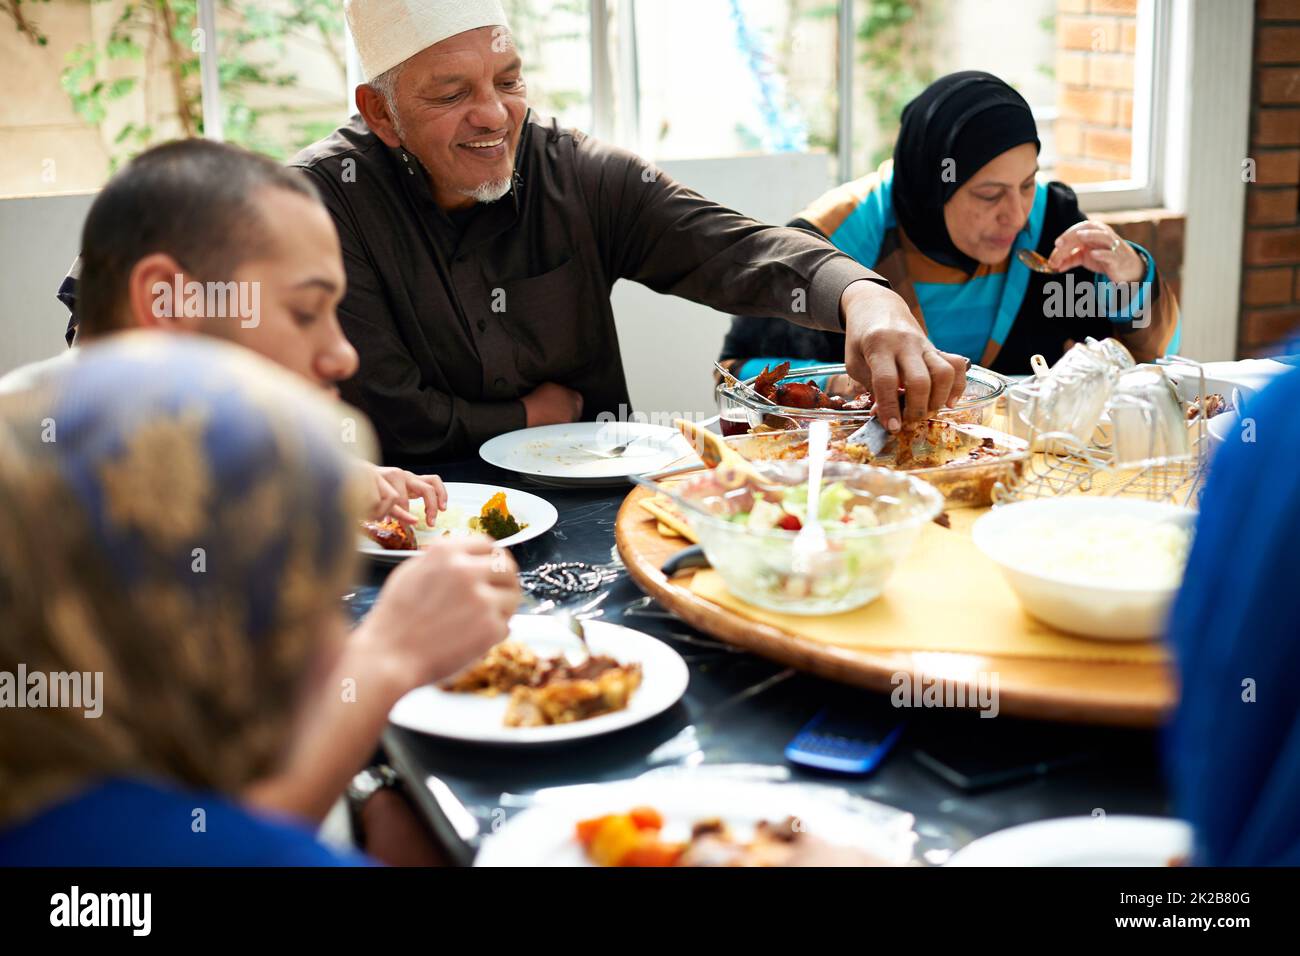 Food brings family together. Shot of a muslim family eating together. Stock Photo